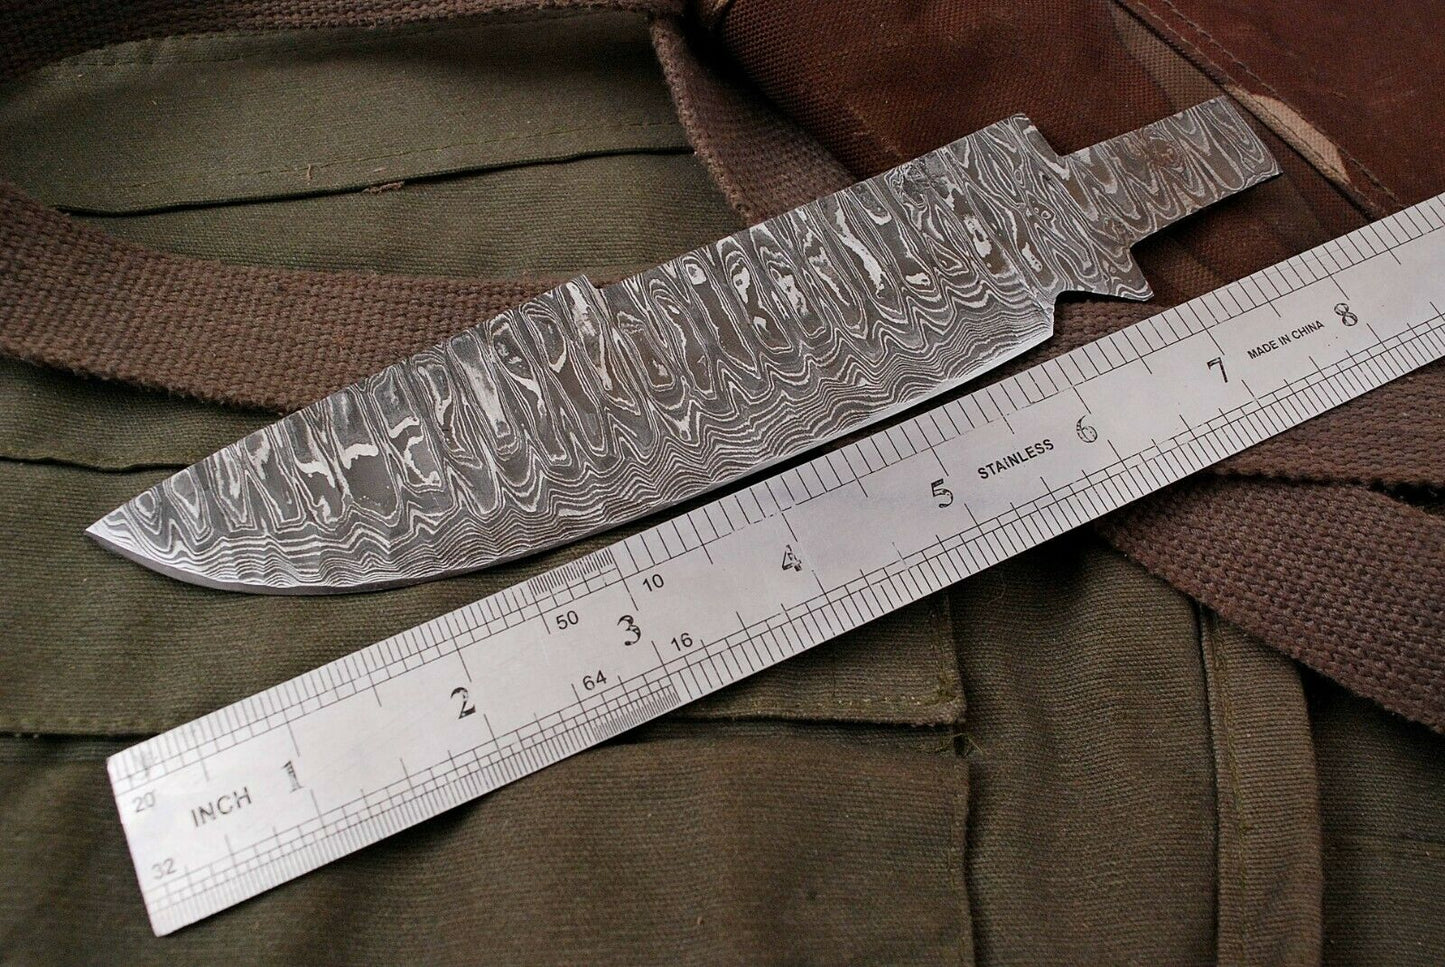 HAND FORGED DAMASCUS STEEL Blank Blade Hunting Knife Hammered Blade Knife Making